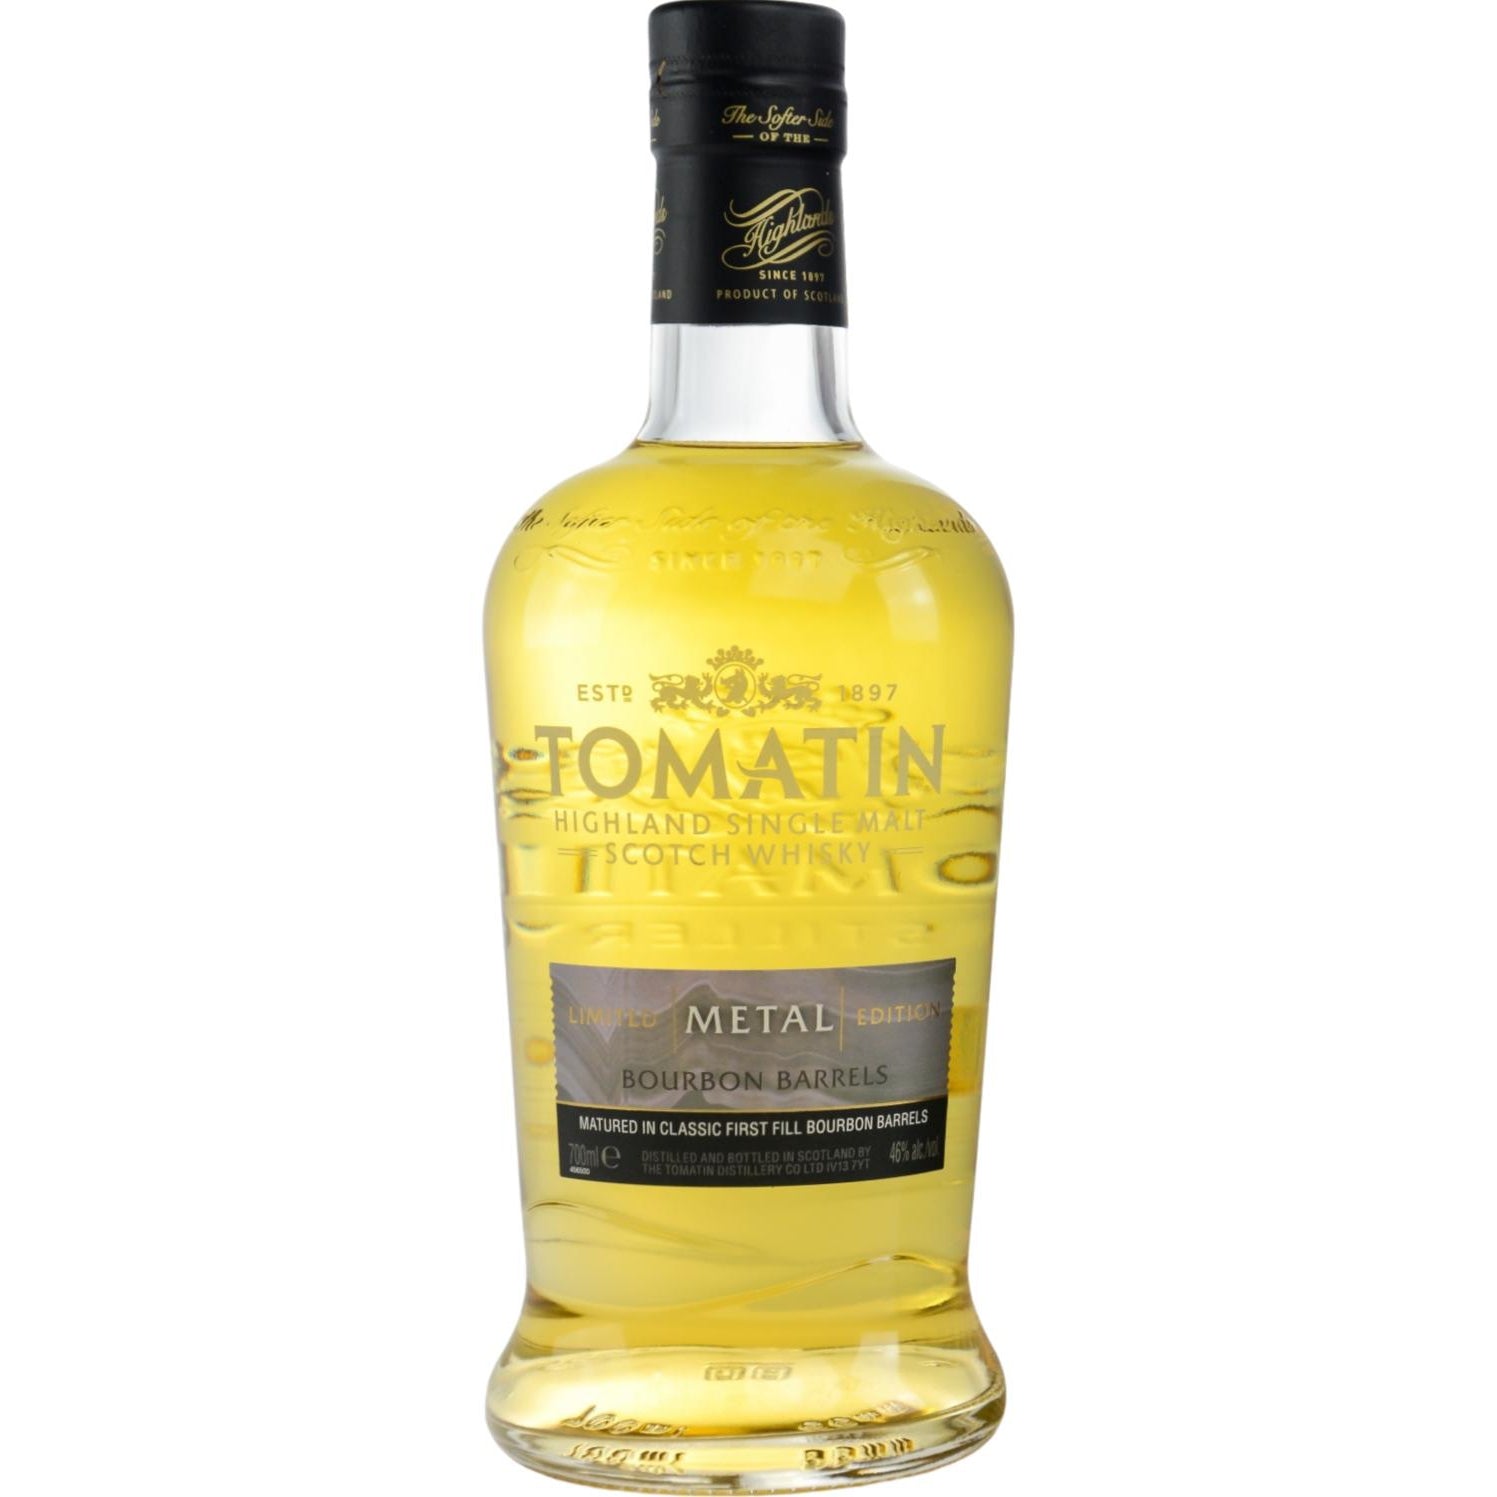 Tomatin EARTH Five Virtues Series Limited Edition PEATED MALT 46% Vol. 0,7l in Giftbox